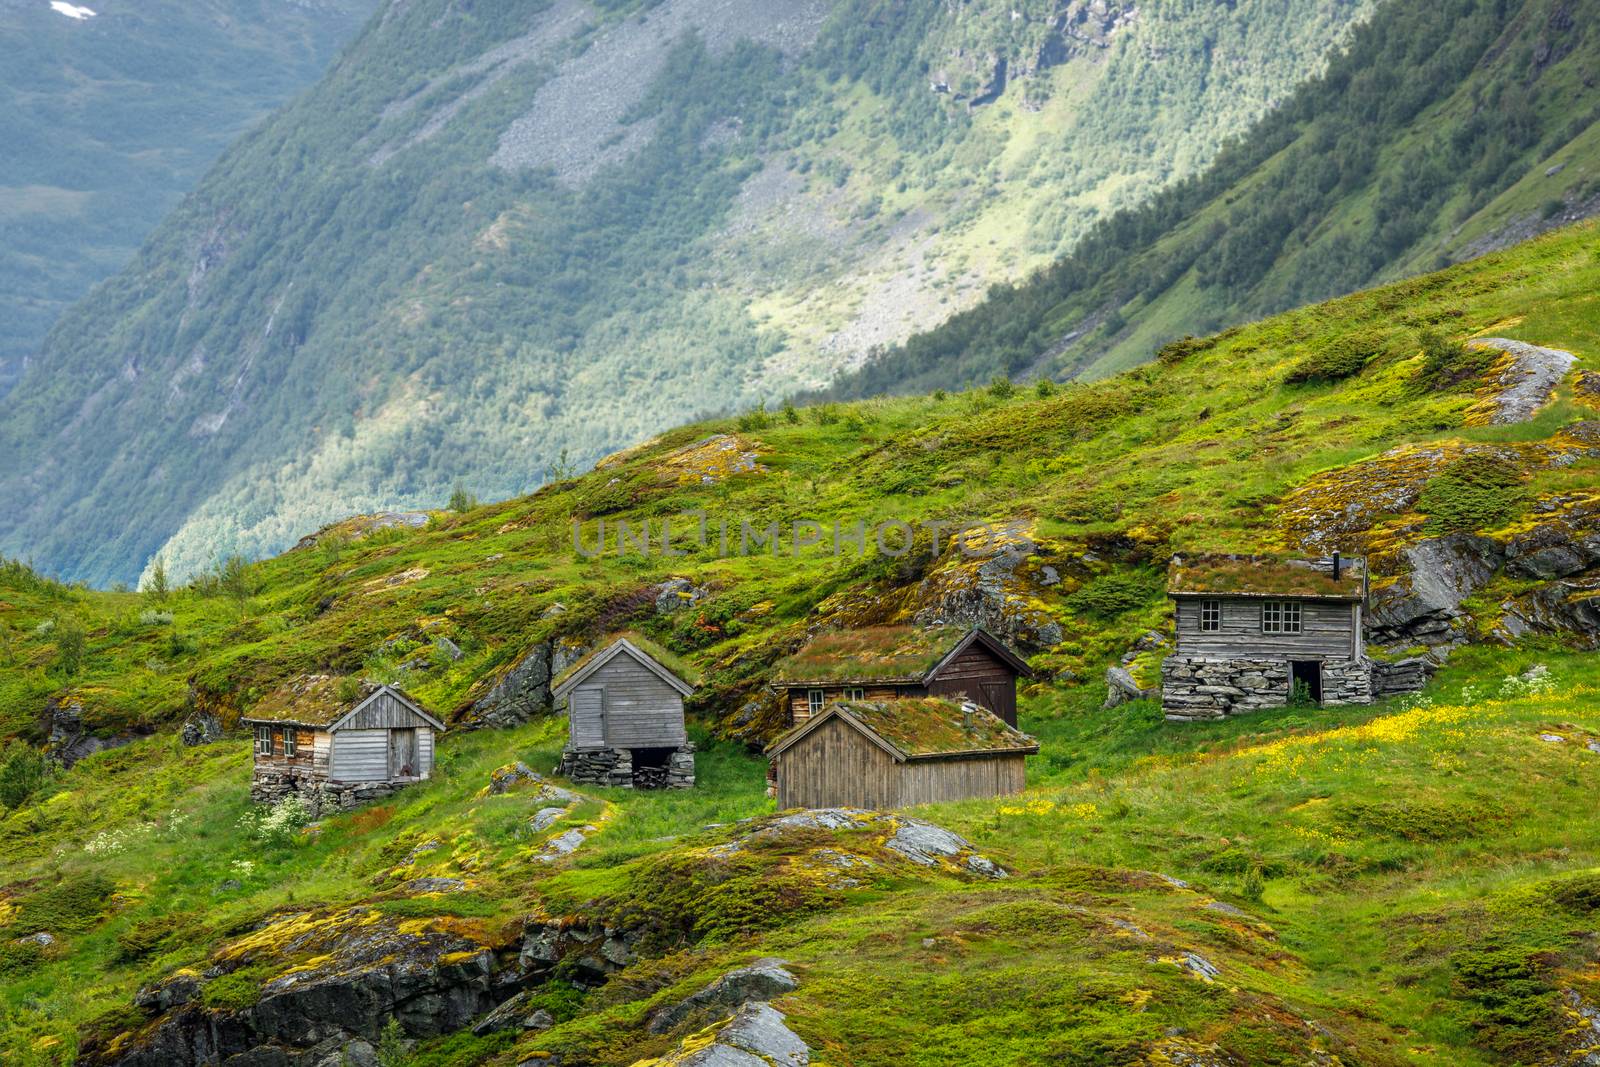 Norwegian mountain village with traditional turf roof houses, Geiranger, Sunnmore region, More og Romsdal county, Norway